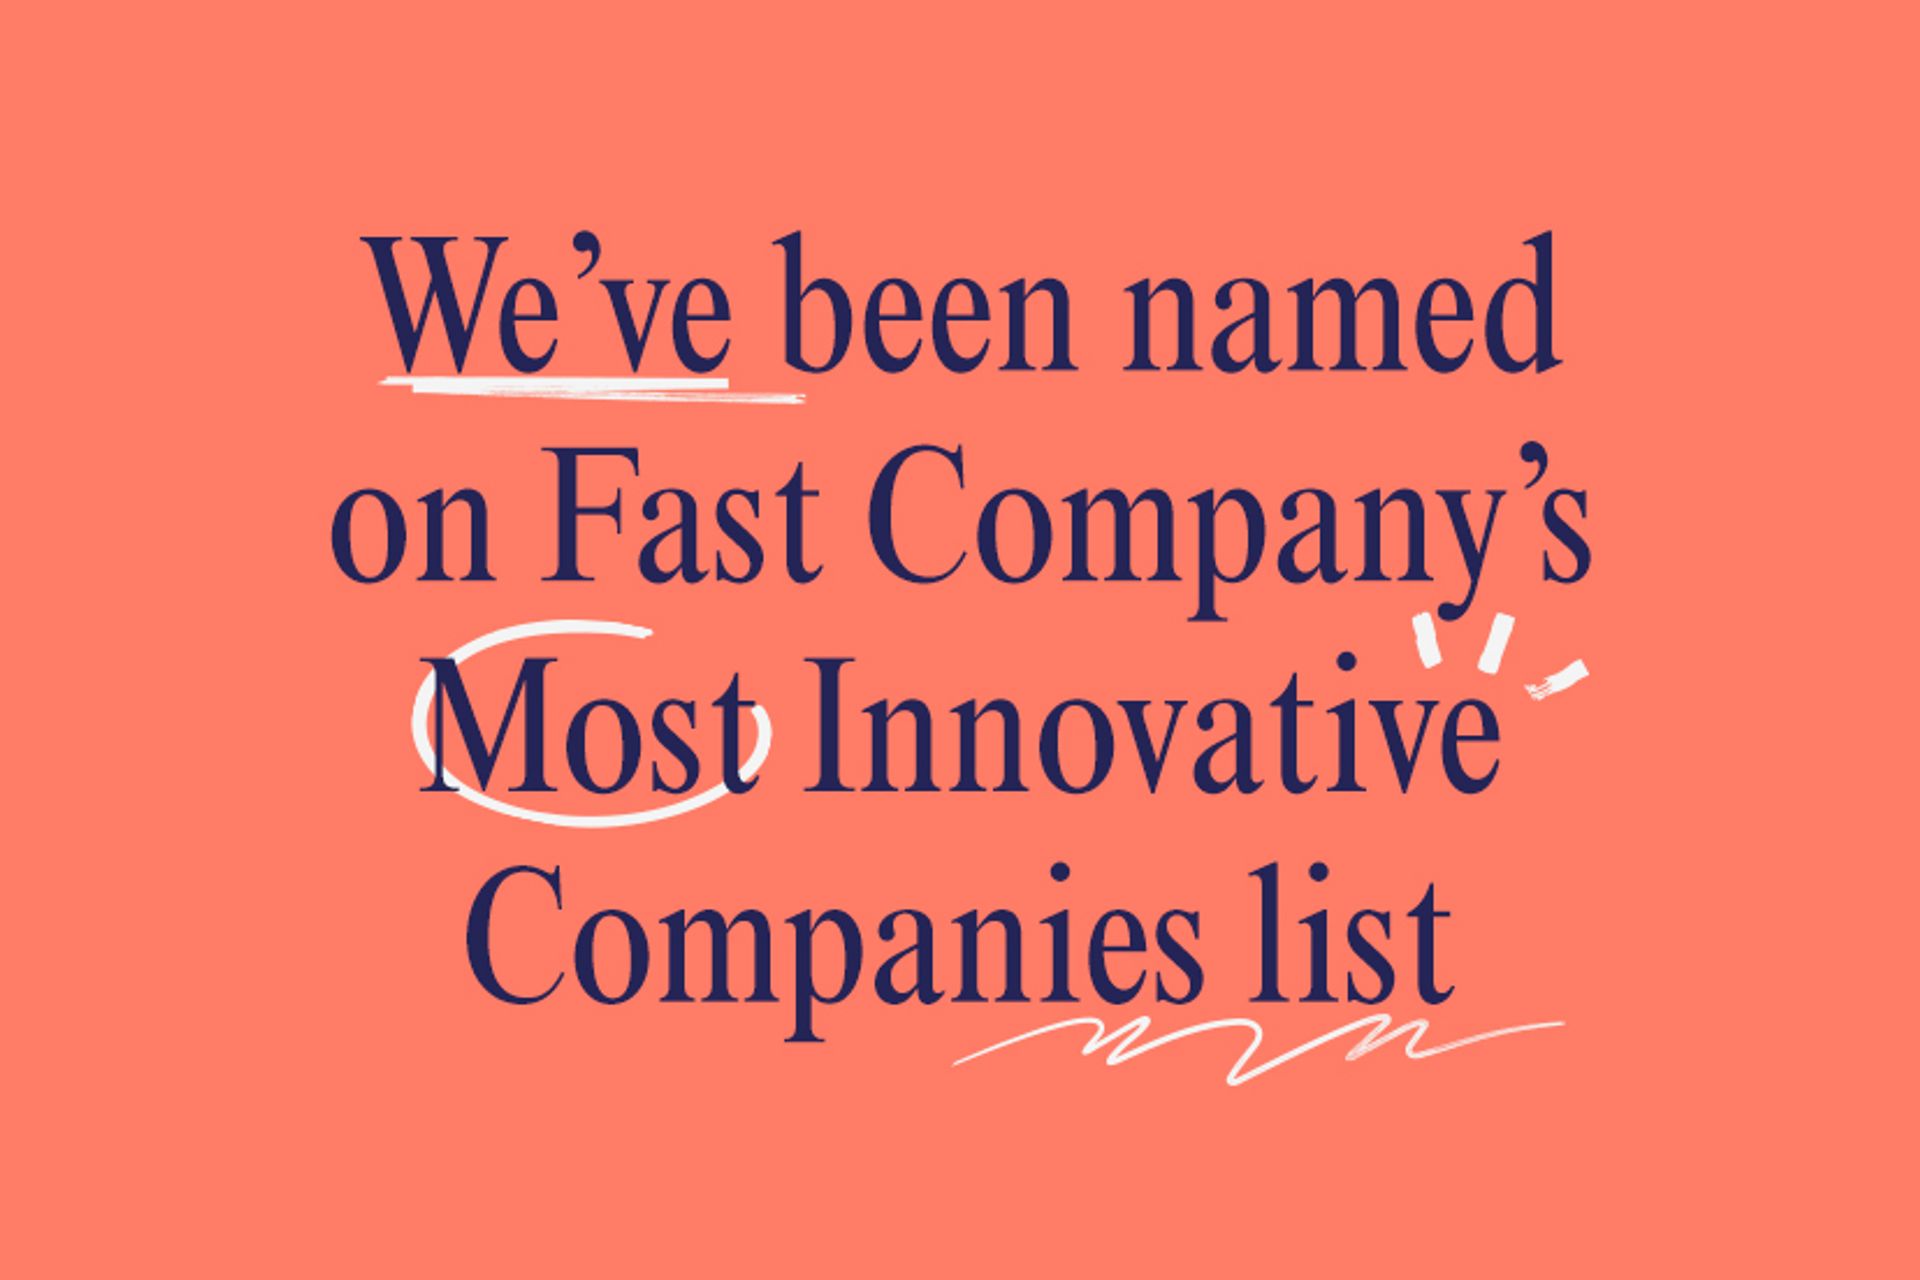 The text: "We've been named on Fast Company's Most Innovative Companies list"